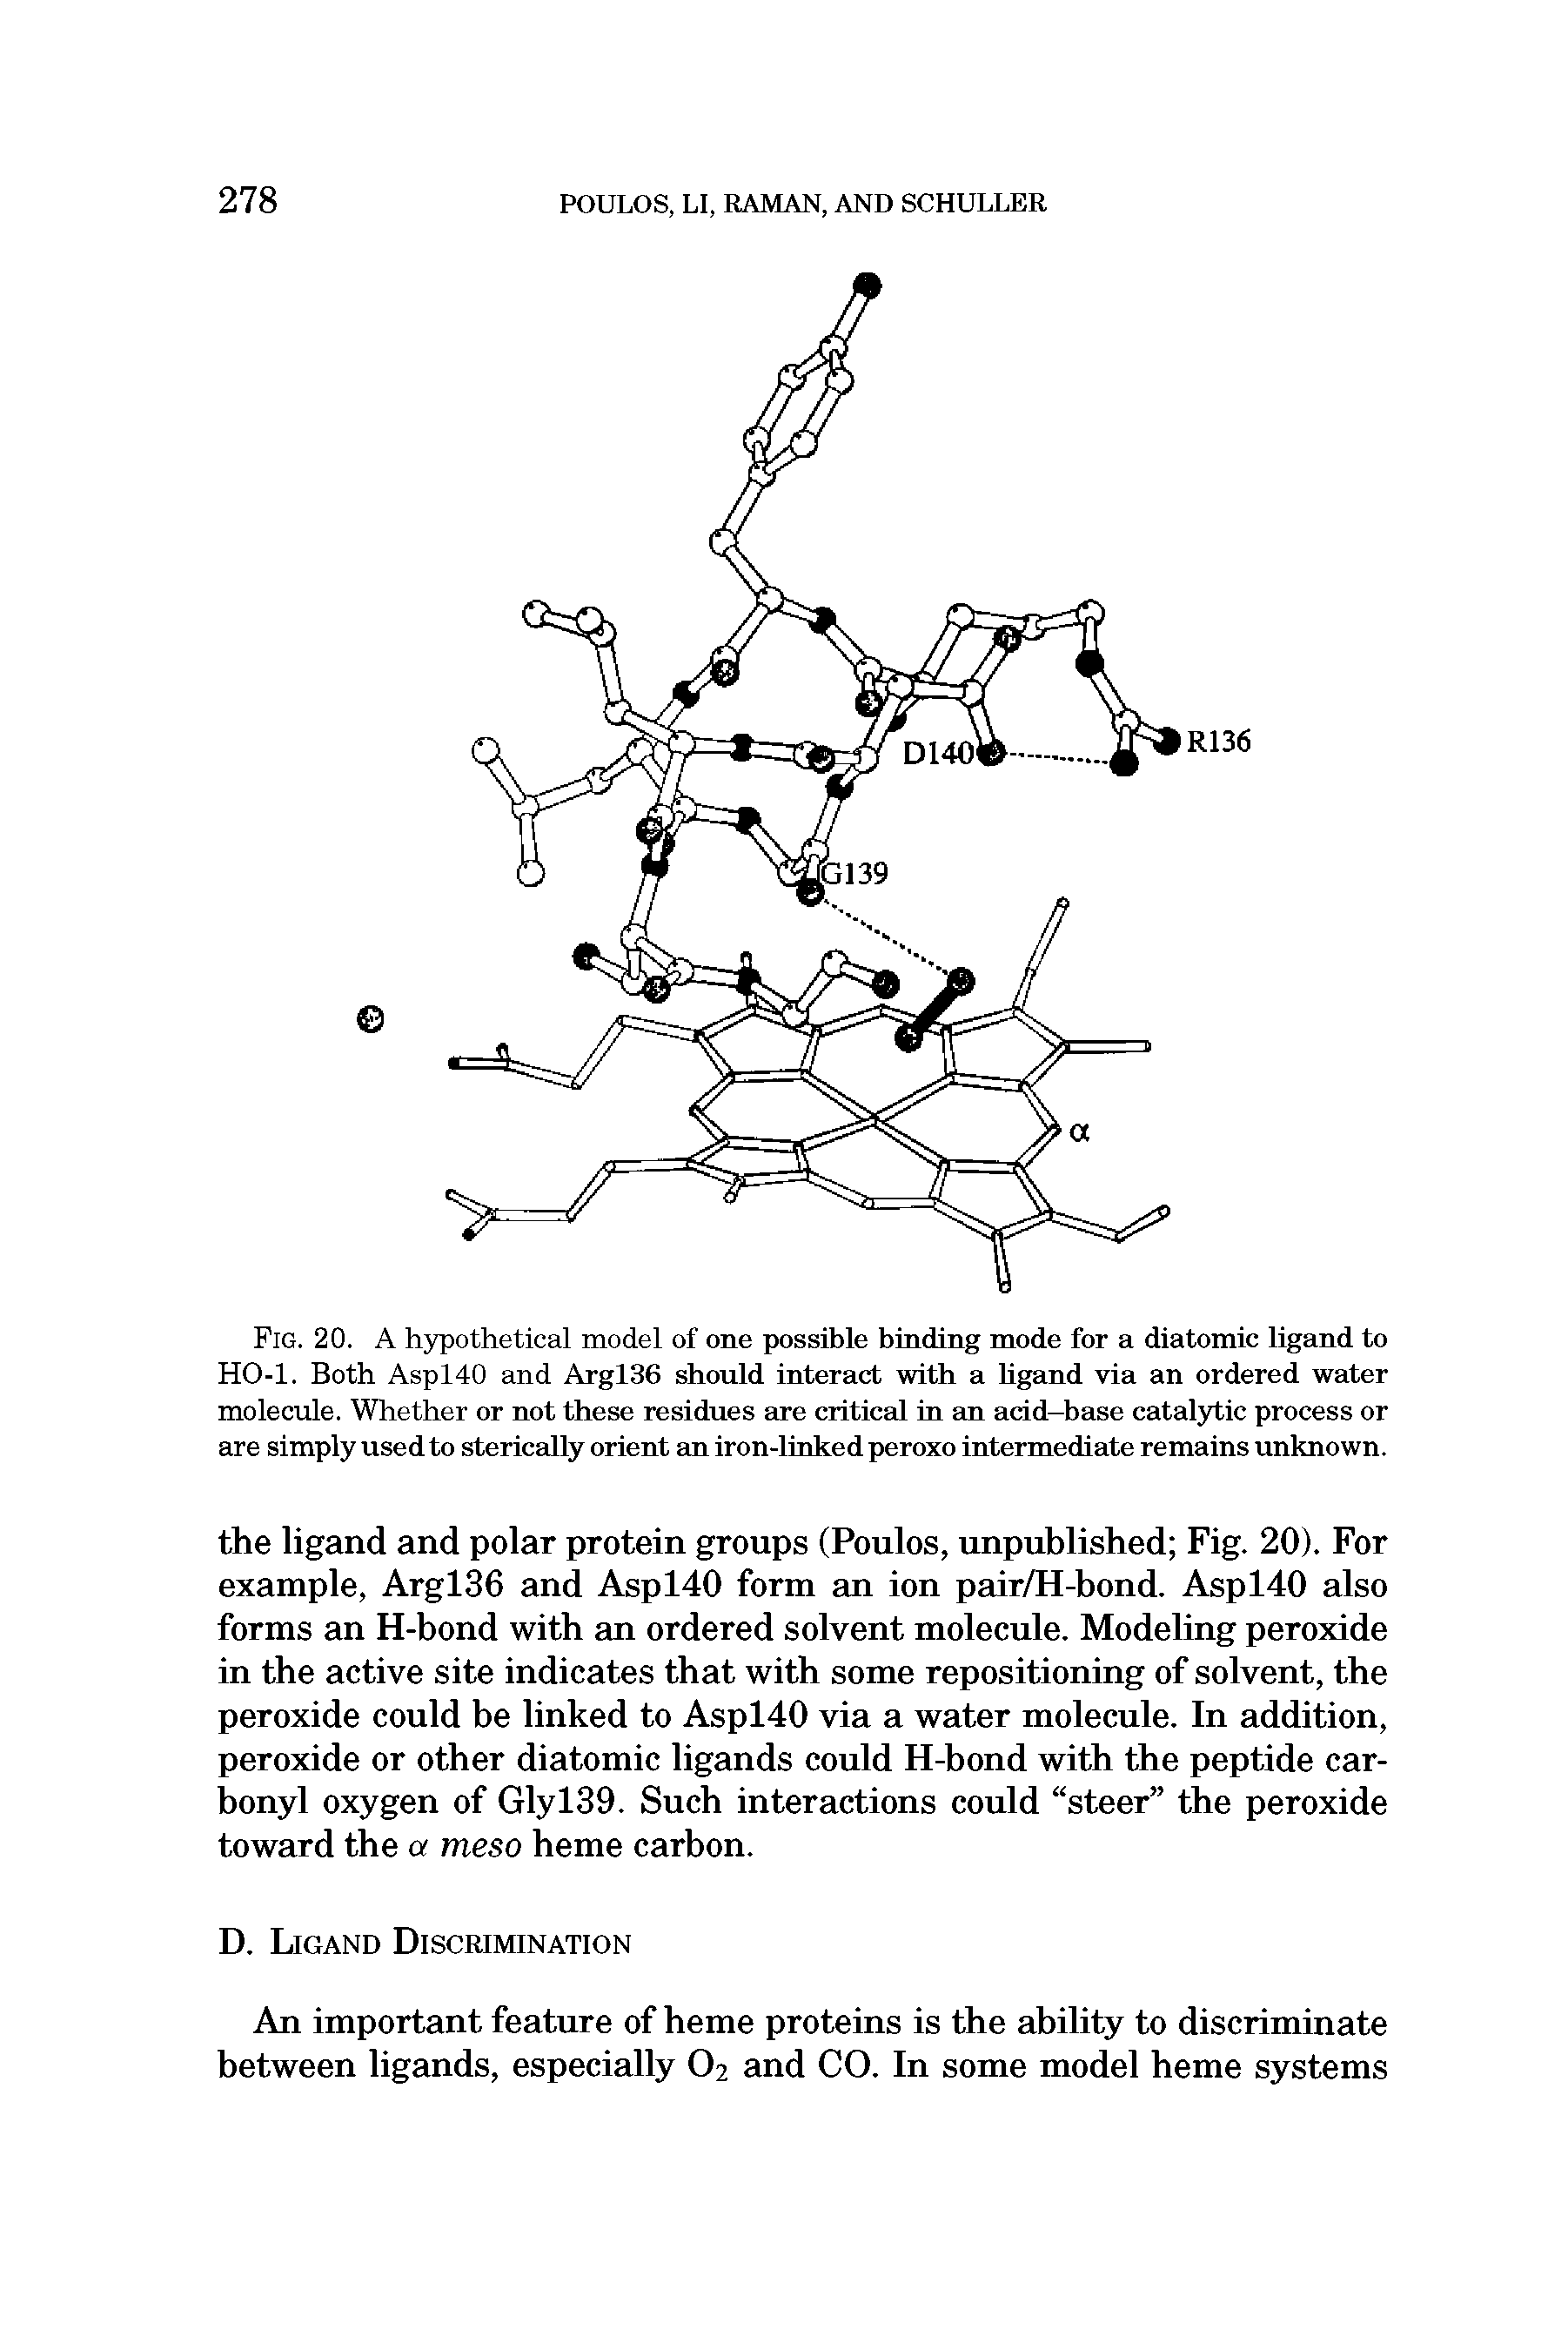 Fig. 20. A hypothetical model of one possible binding mode for a diatomic ligand to HO-1. Both Aspl40 and Argl36 should interact with a ligand via an ordered water molecule. Whether or not these residues are critical in an arid-base catalytic process or are simply used to sterically orient an iron-linked peroxo intermediate remains unknown.